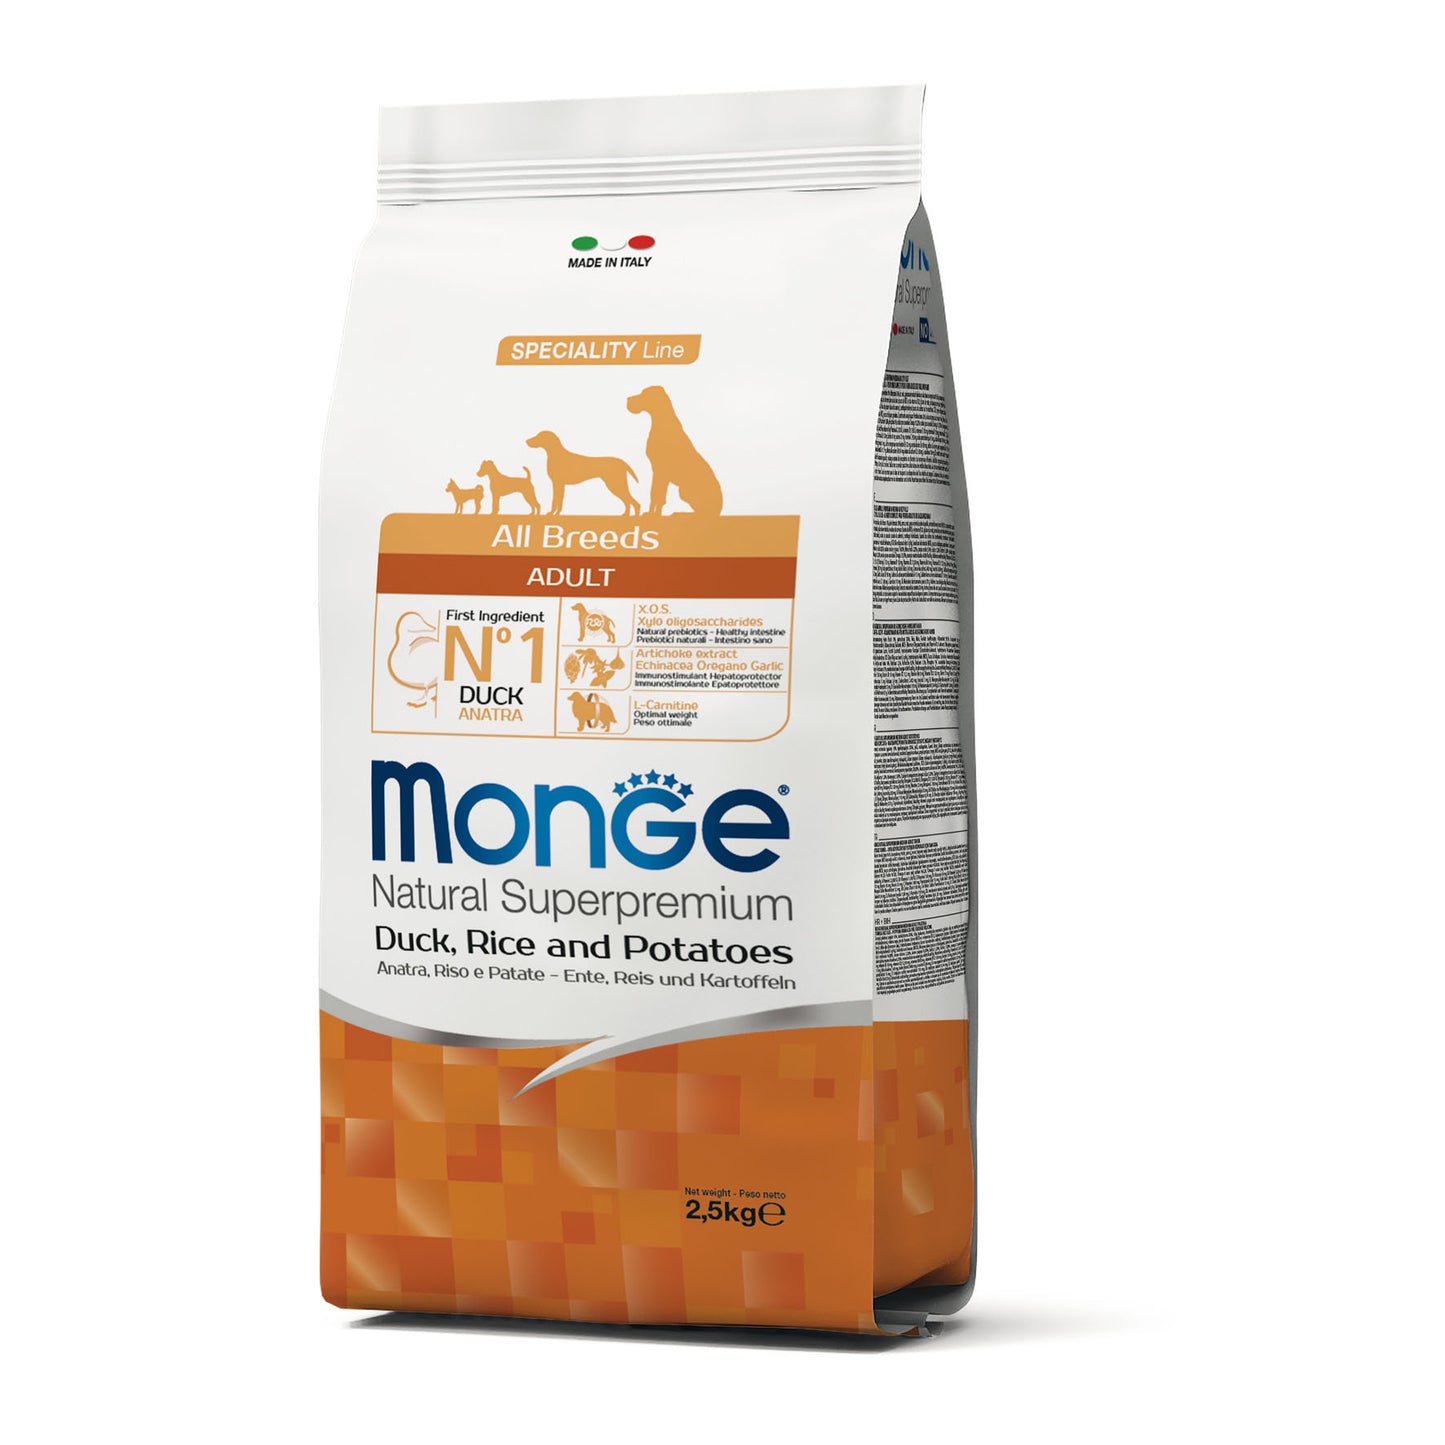 Monge Dog - SPECIALITY Line - Monoprotein - Adult ALL BREEDS Duck